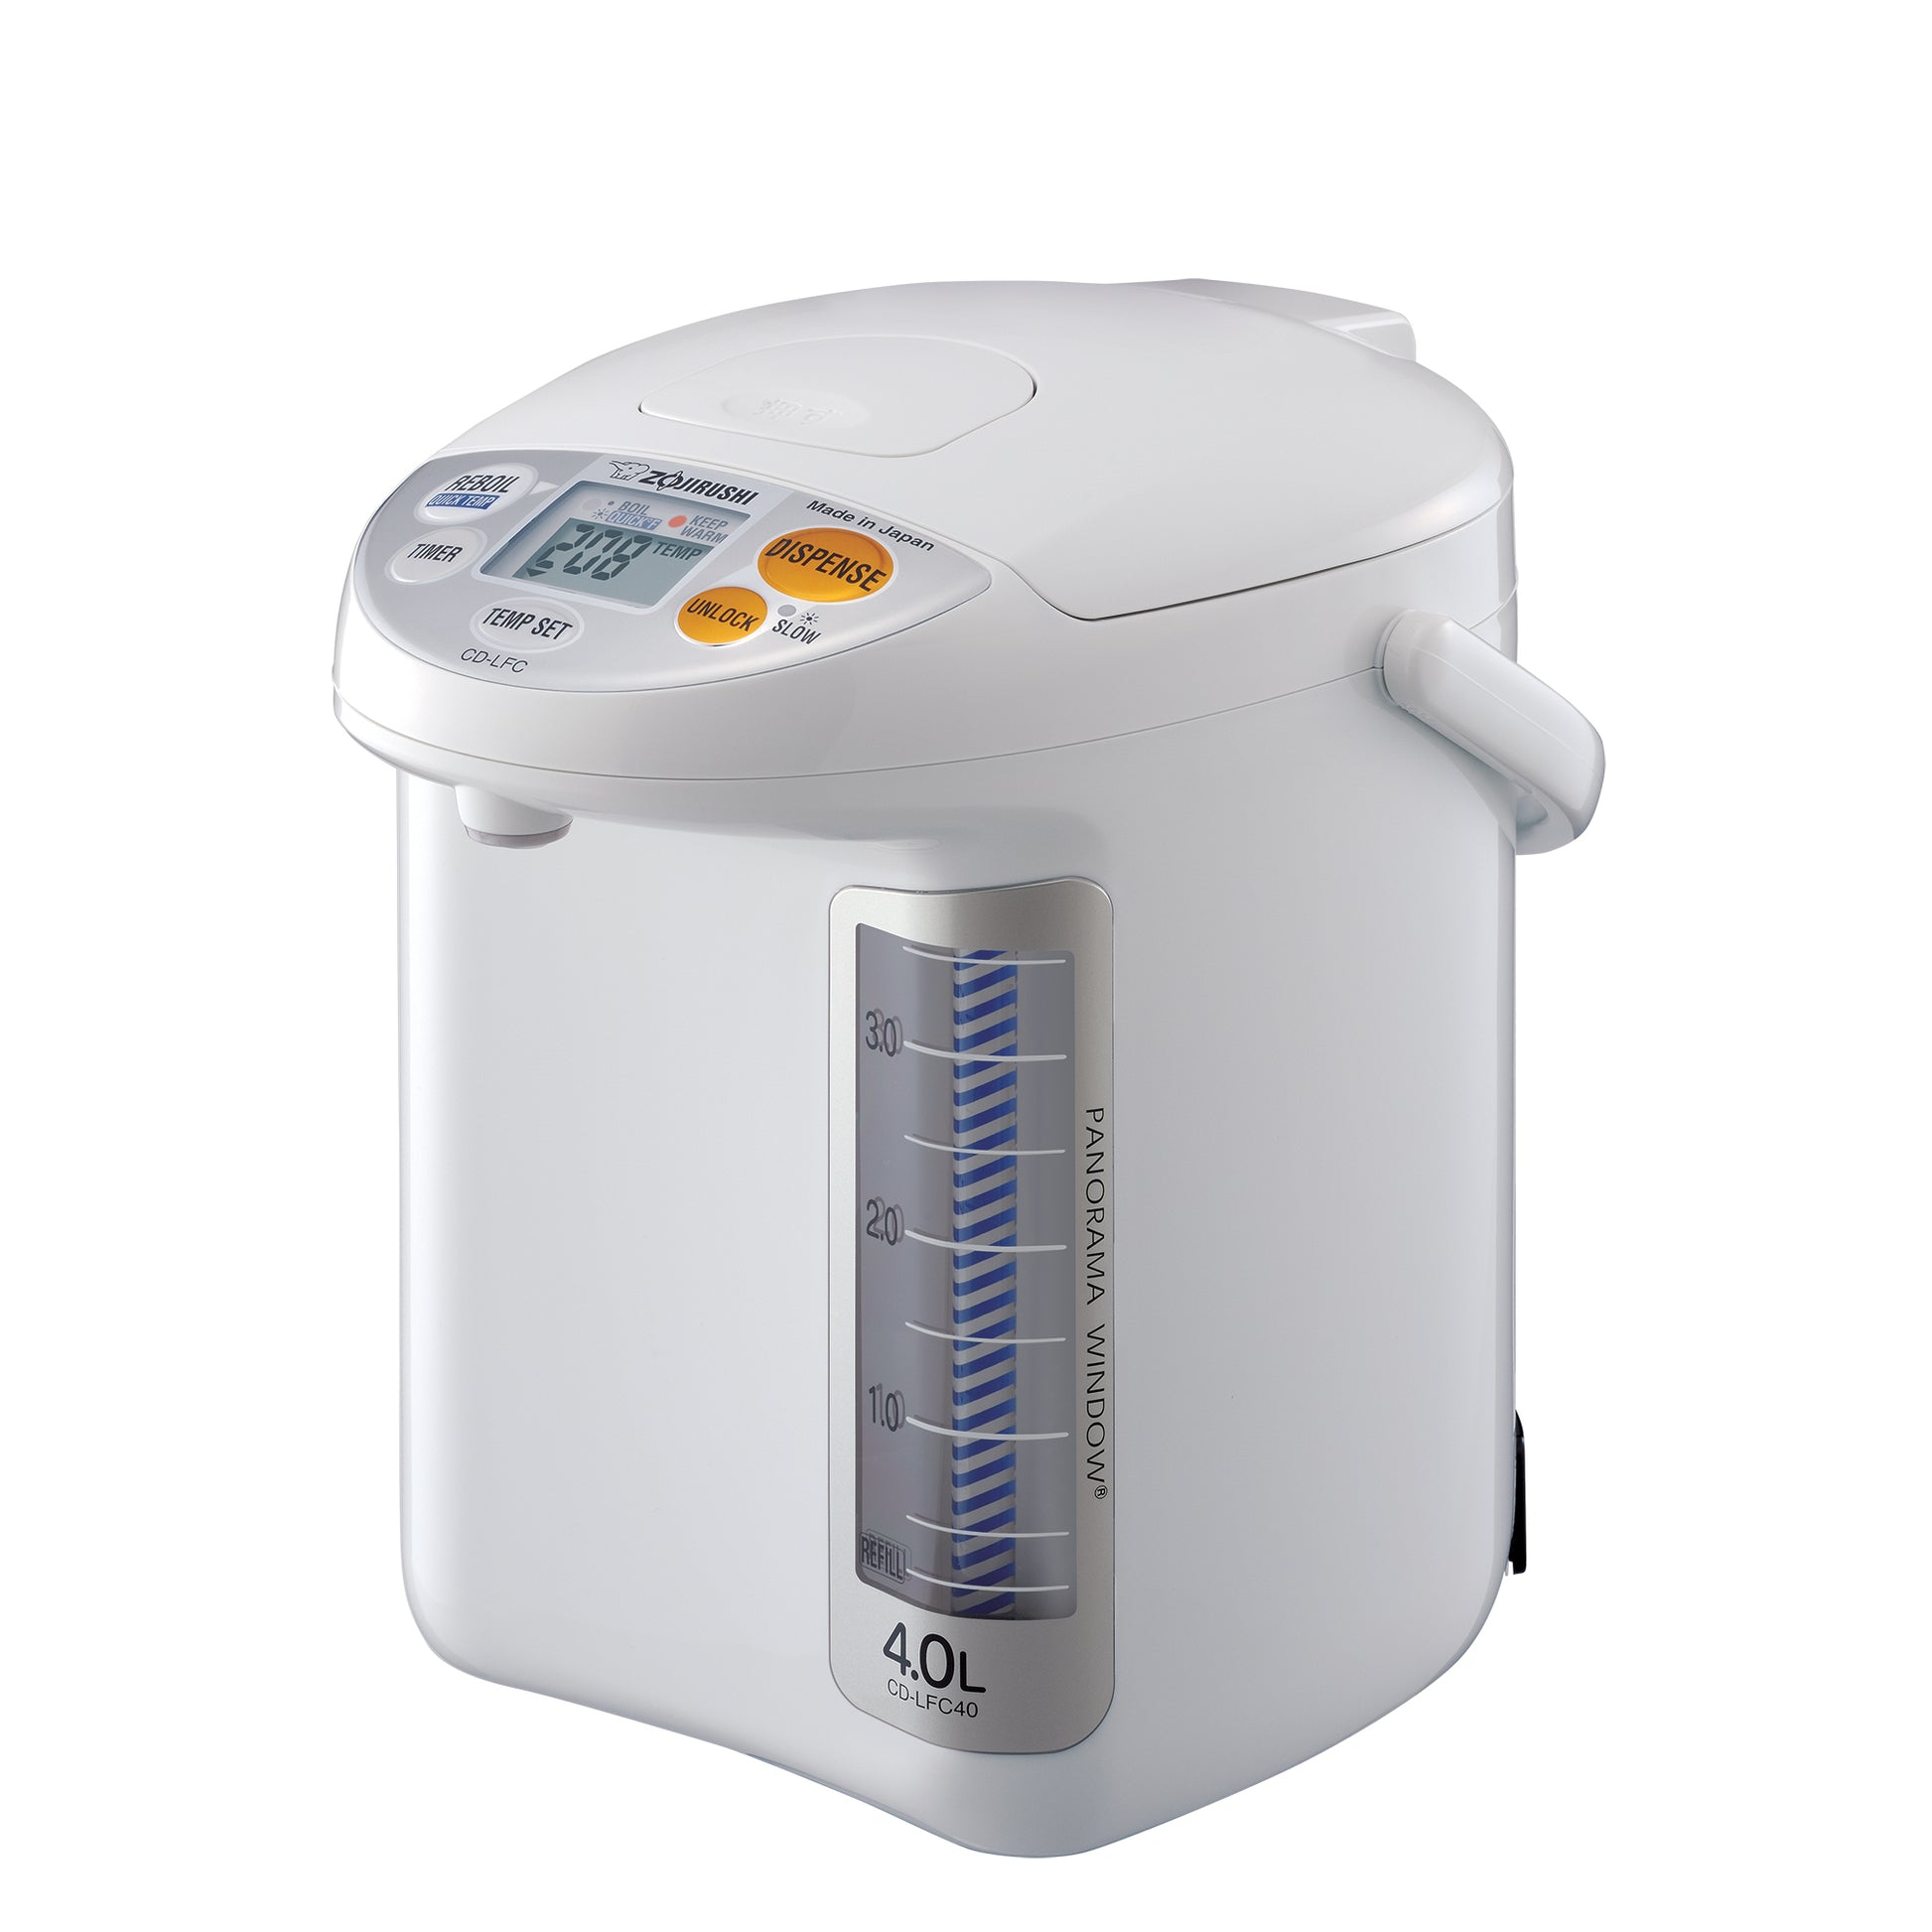 China Made Home Appliance Products Water Boiler 2L Electric Pour